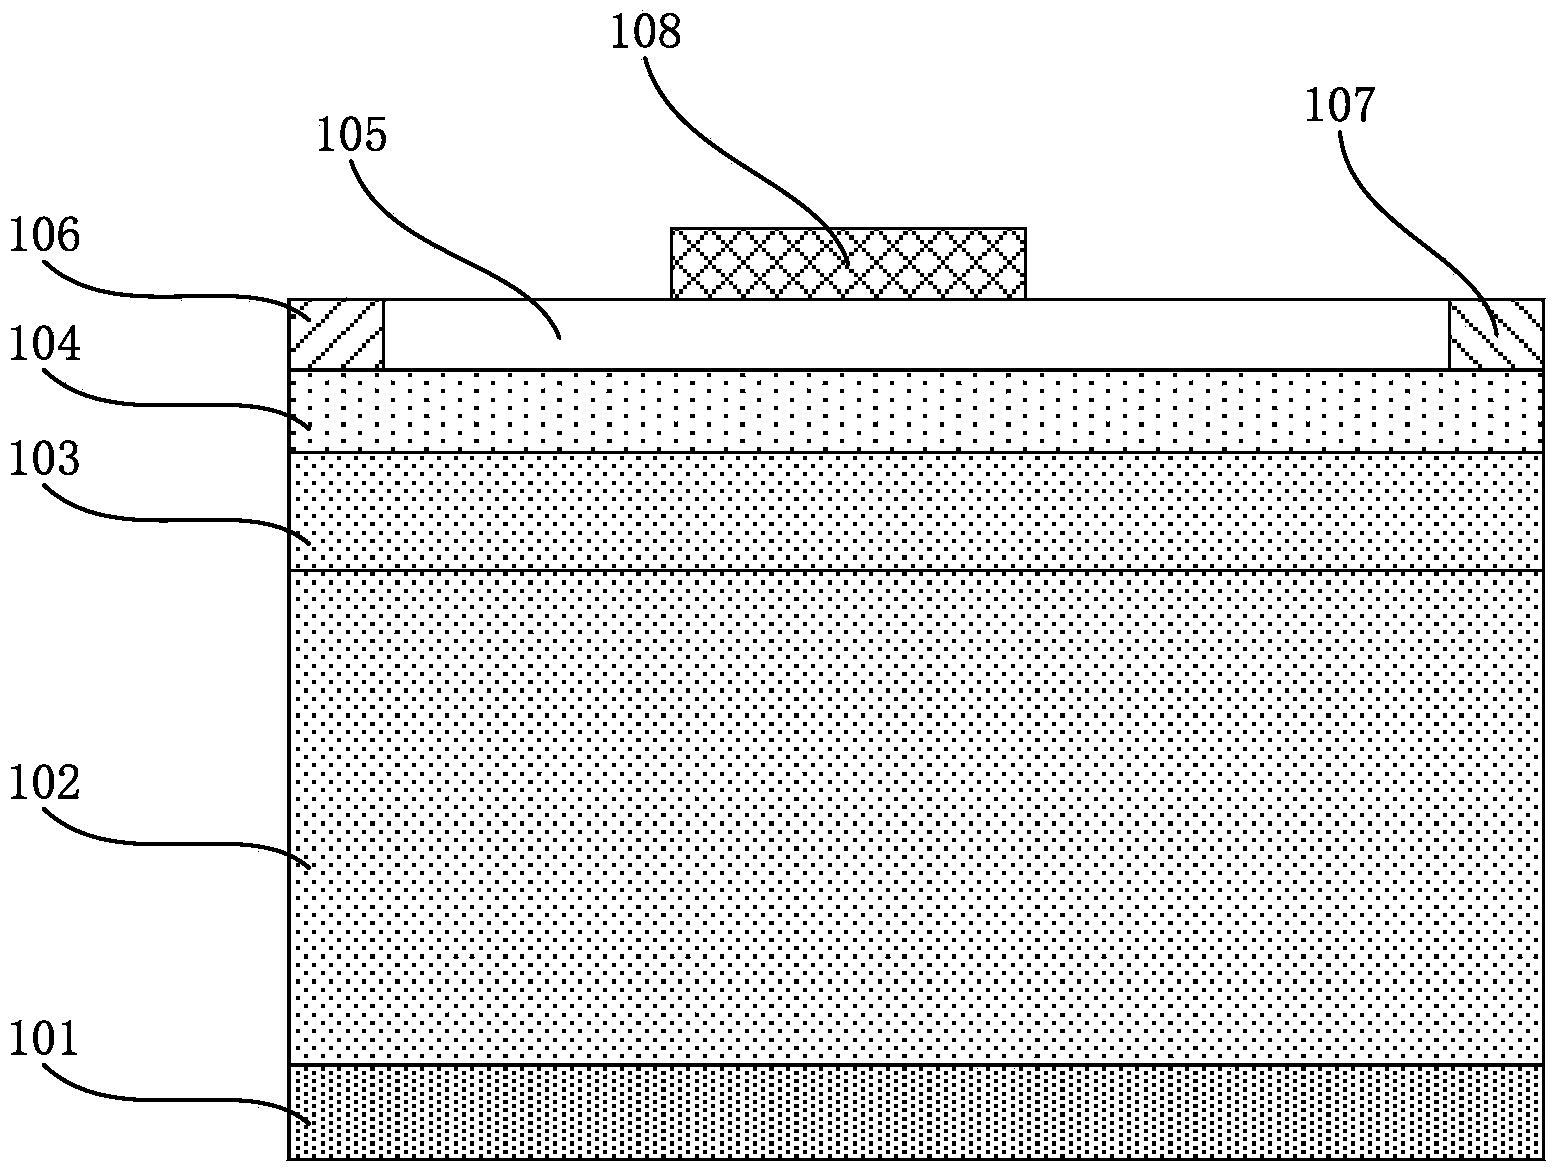 Gallium-nitride-based heterojunction field effect transistor with combined gate dielectric layer